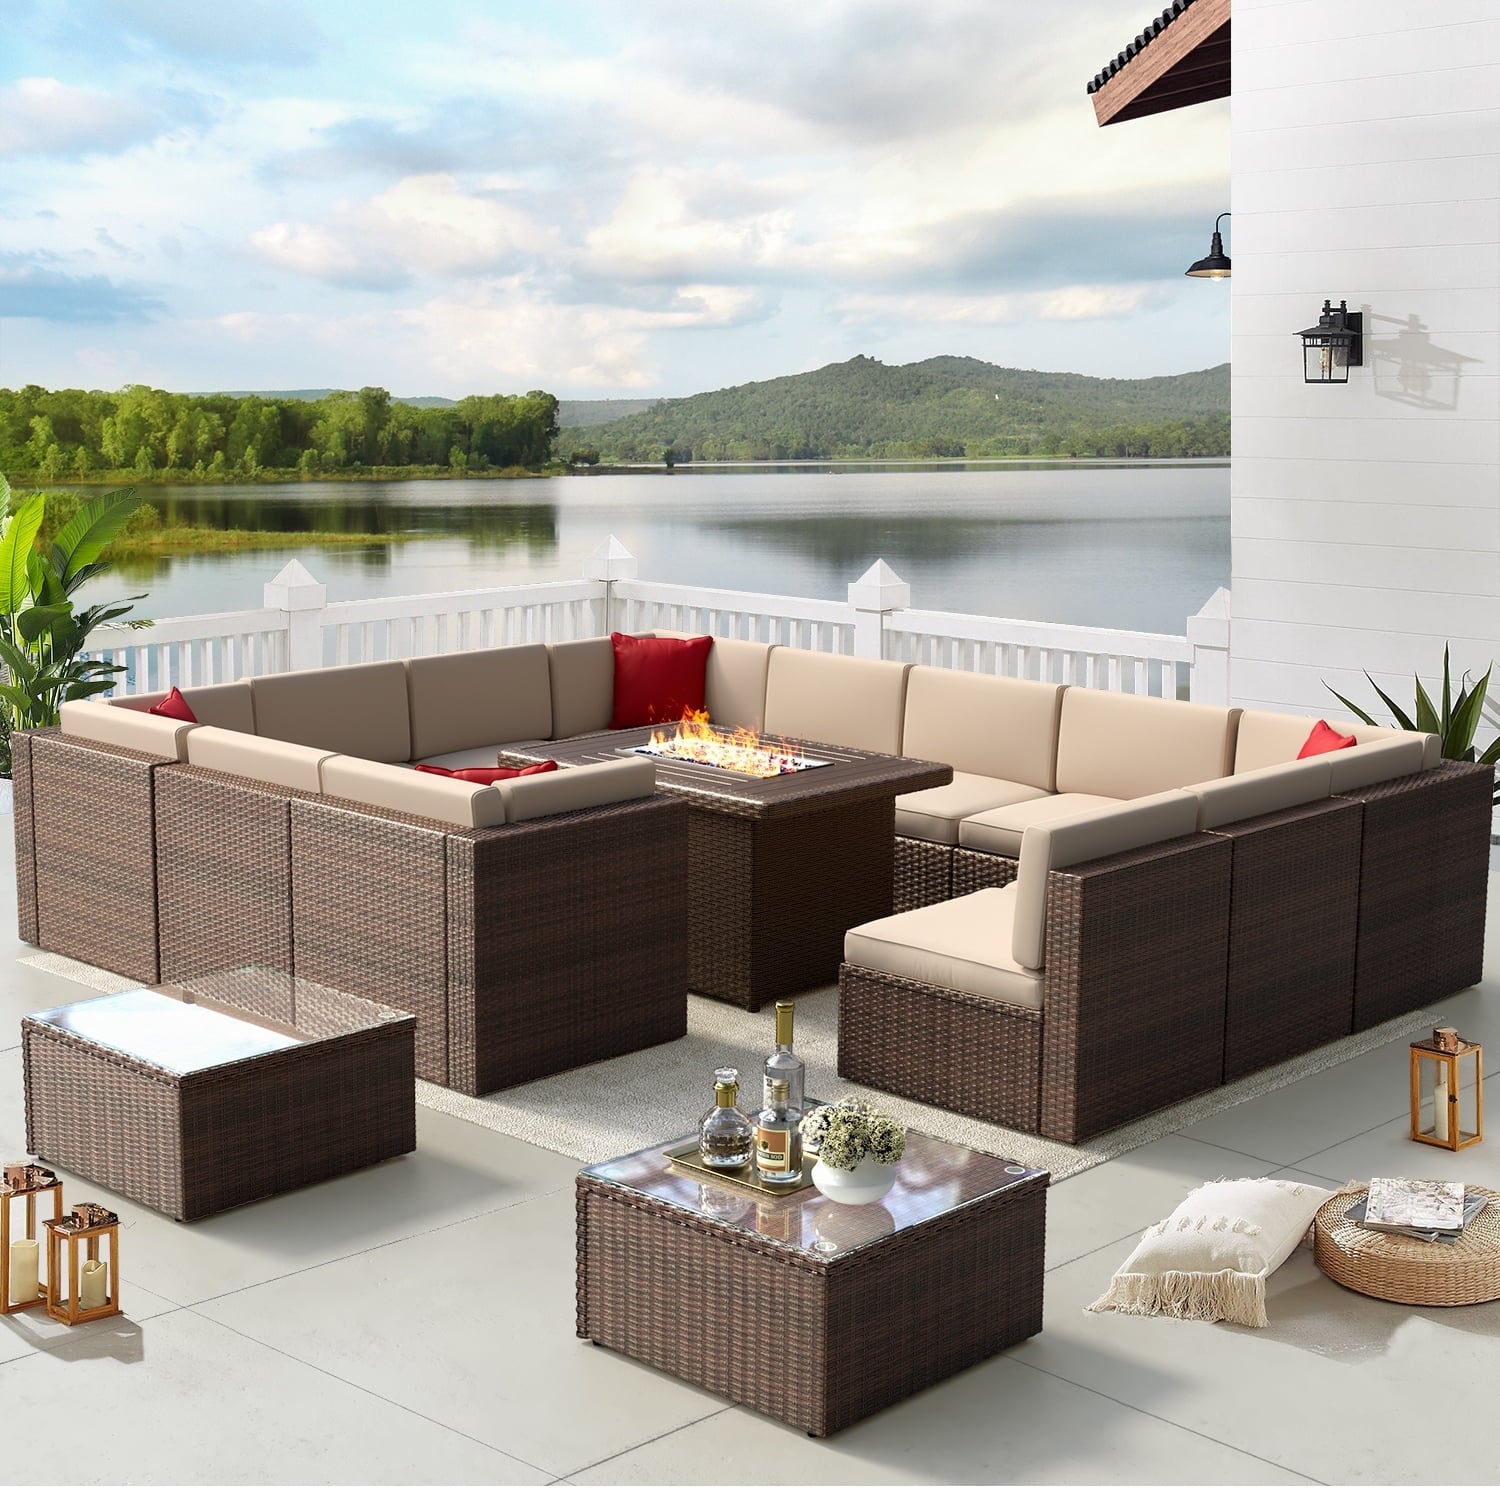 15 Piece Outdoor Patio Conversation Set with 44-inch Fire Pit Table,Outdoor Furniture Sectional Wicker Sofa Set with Beige Cushions